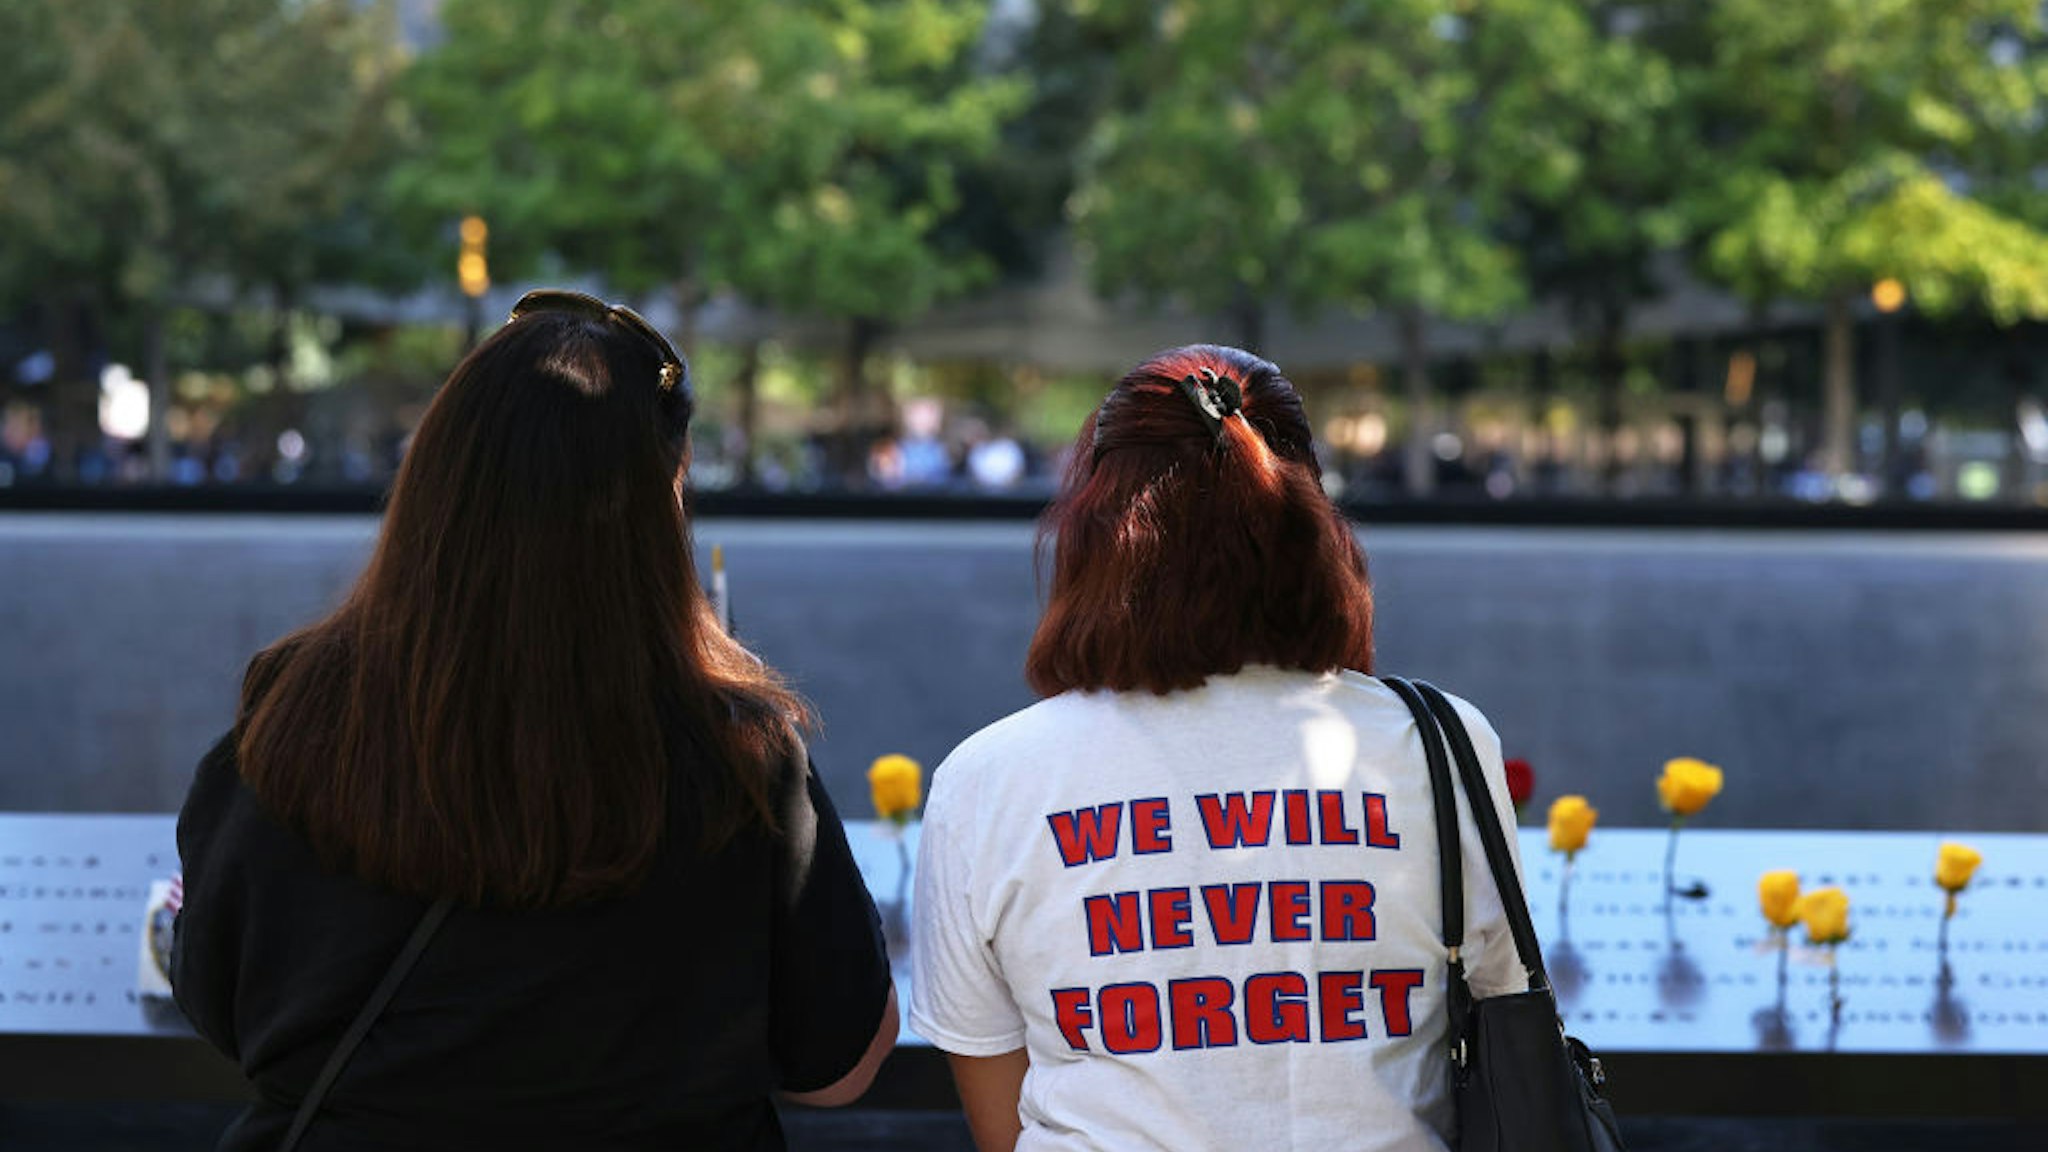 People attend the annual 9/11 Commemoration Ceremony at the National 9/11 Memorial and Museum on September 11, 2021 in New York City. During the ceremony, six moments of silence were held, marking when each of the World Trade Center towers was struck and fell and the times corresponding to the attack on the Pentagon and the crash of Flight 93.